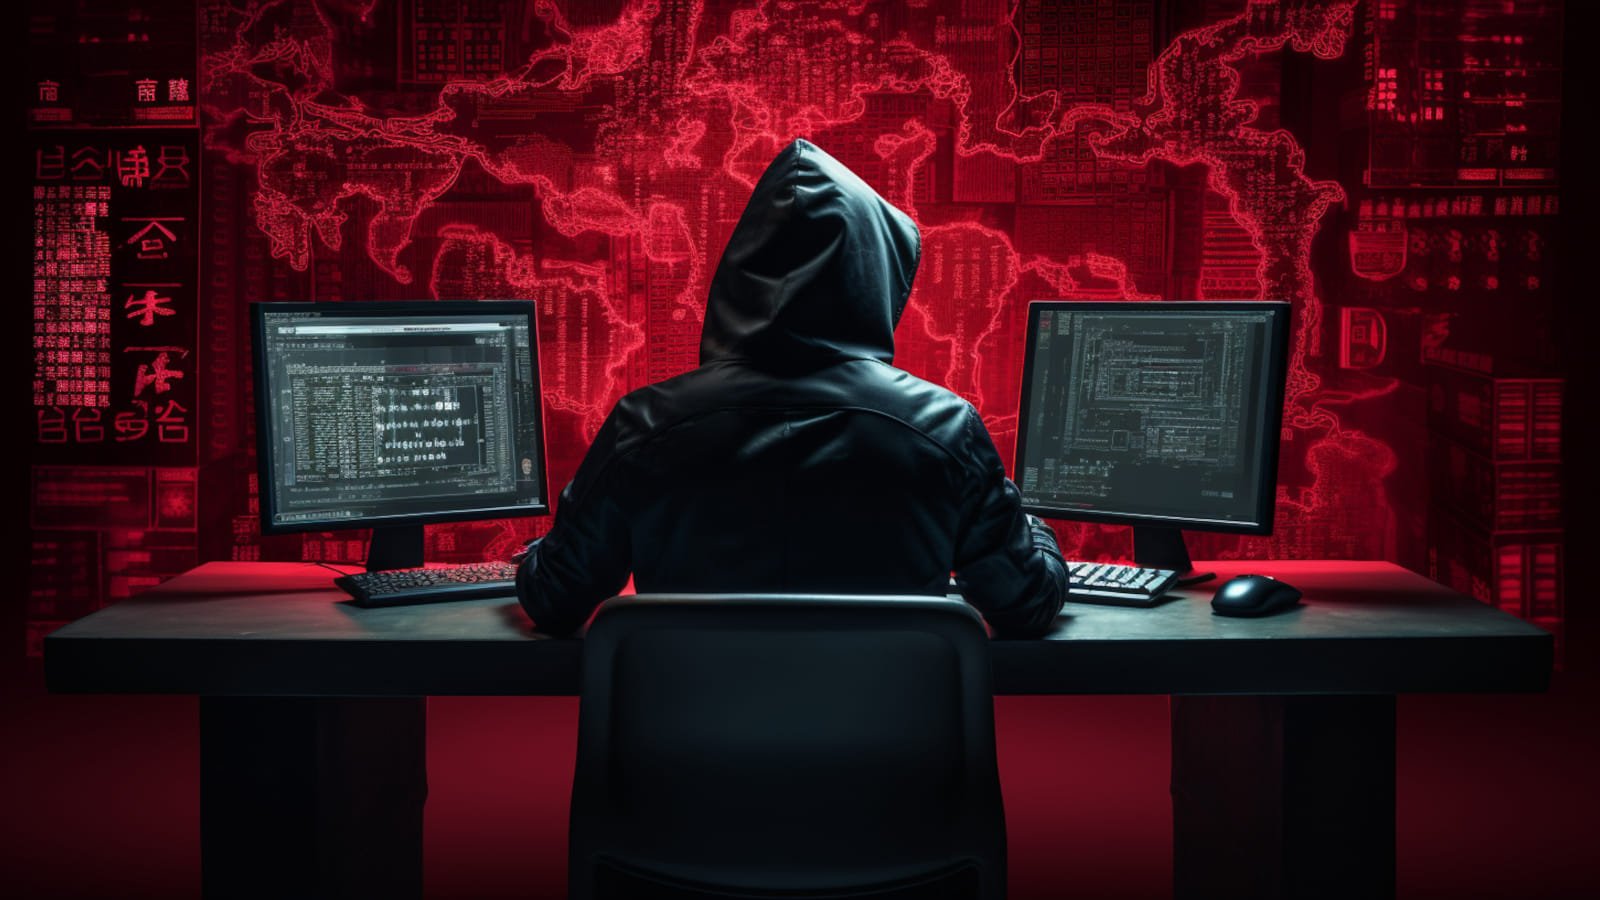 Carderbee hacking group hits Hong Kong orgs in supply chain attack – Source: www.bleepingcomputer.com